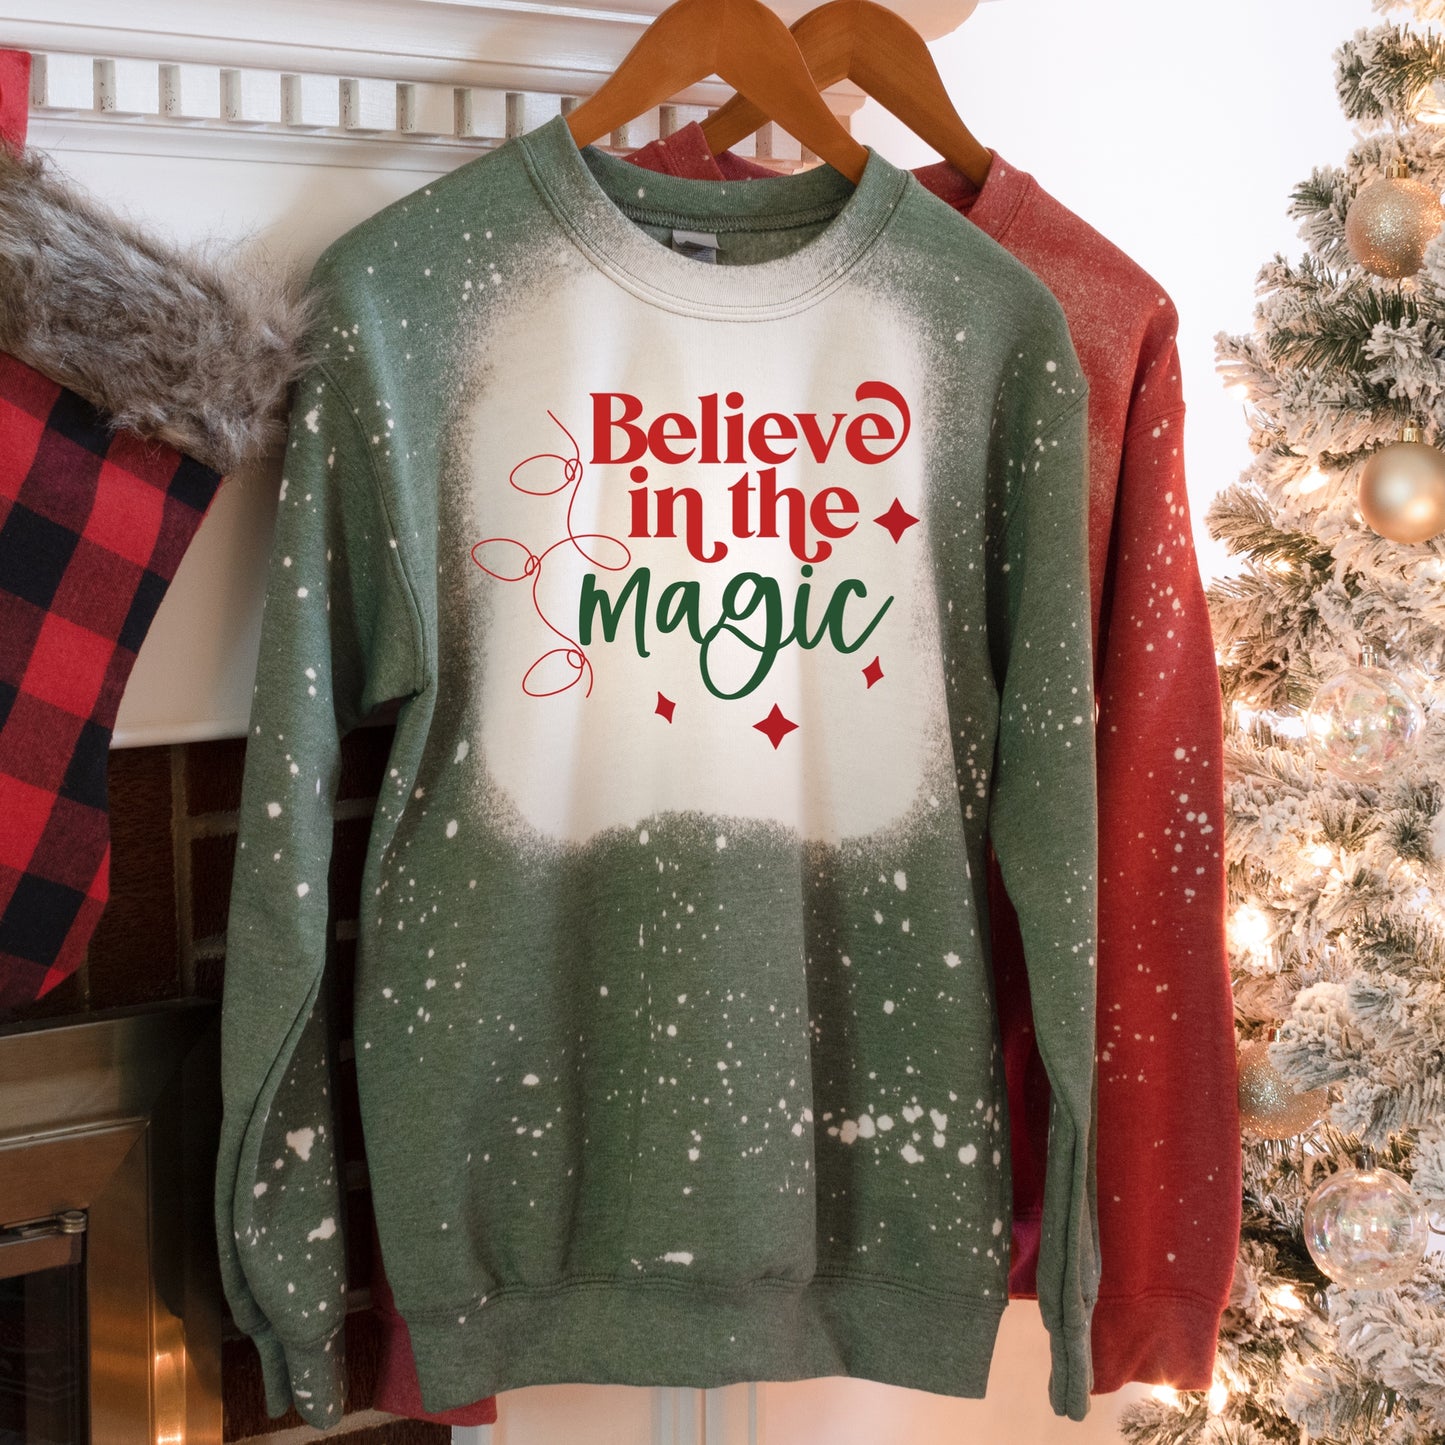 Green sweatshirt with a Christmas graphic that says "Believe in the magic" Iron on Transfers 